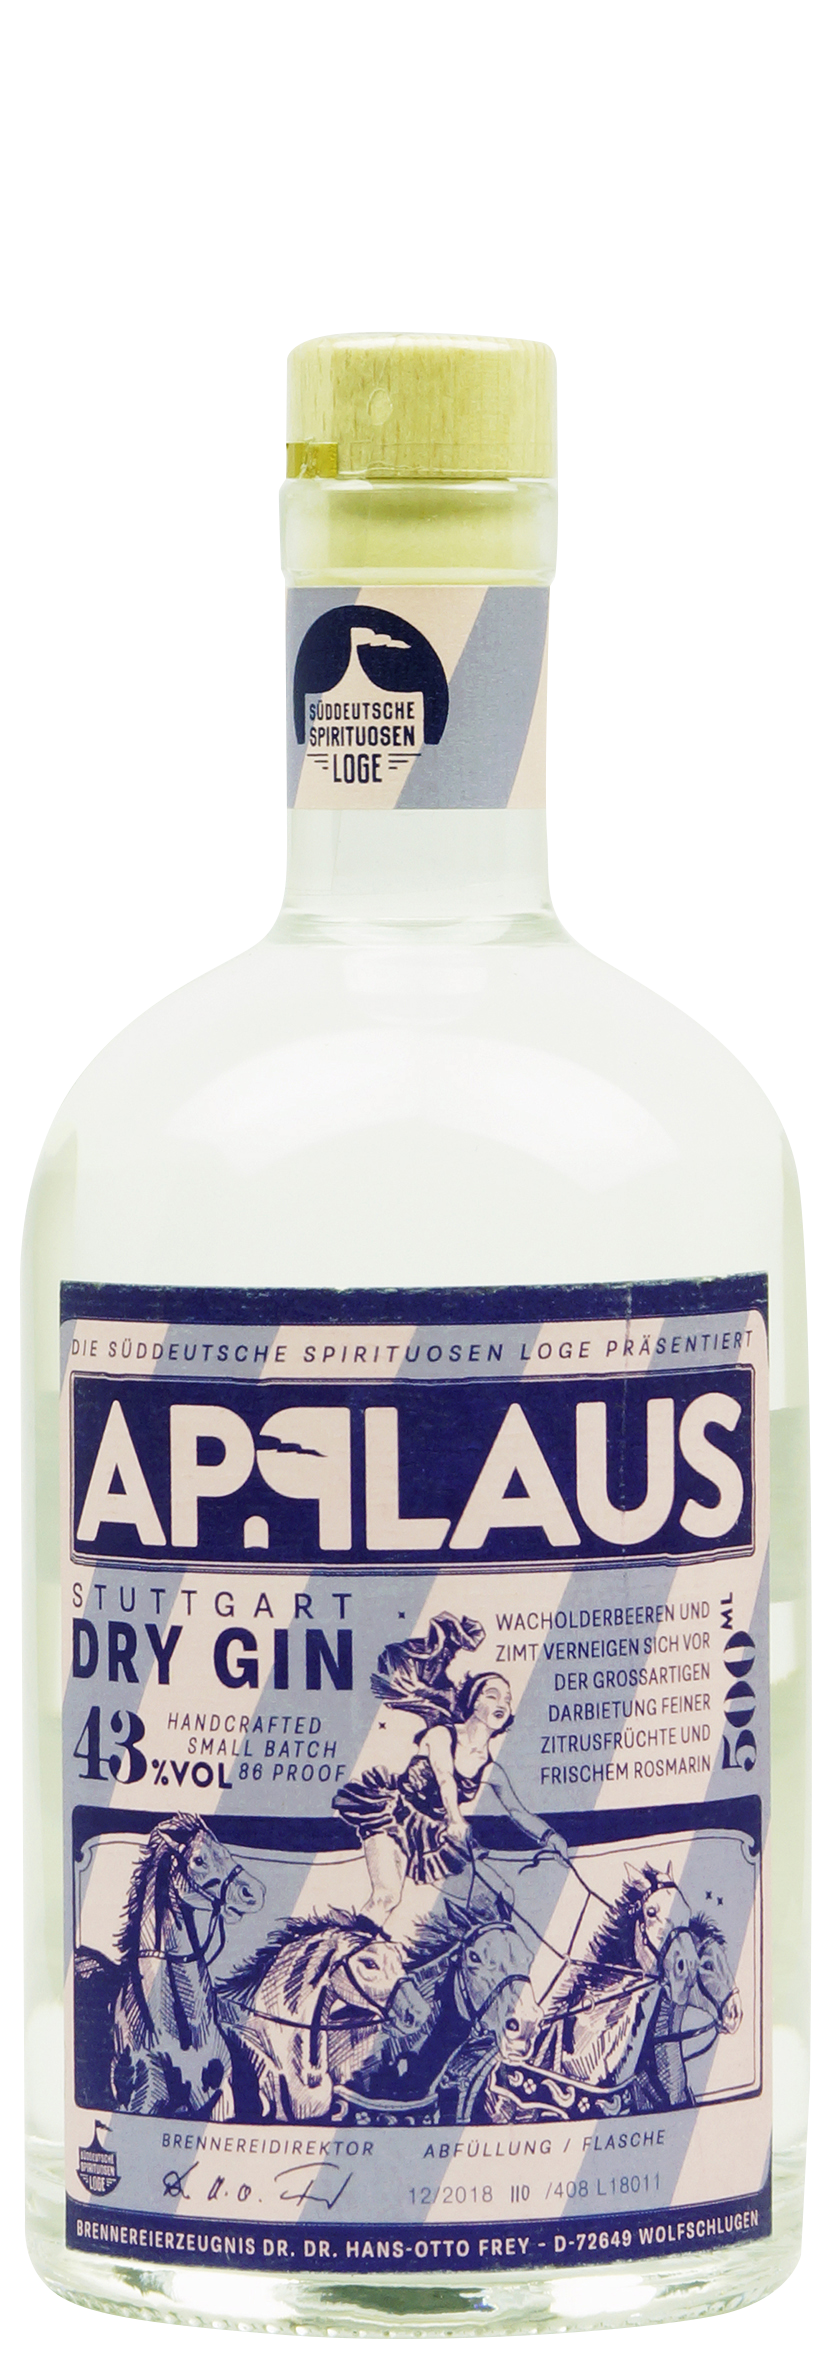 Applaus Dry Gin 0